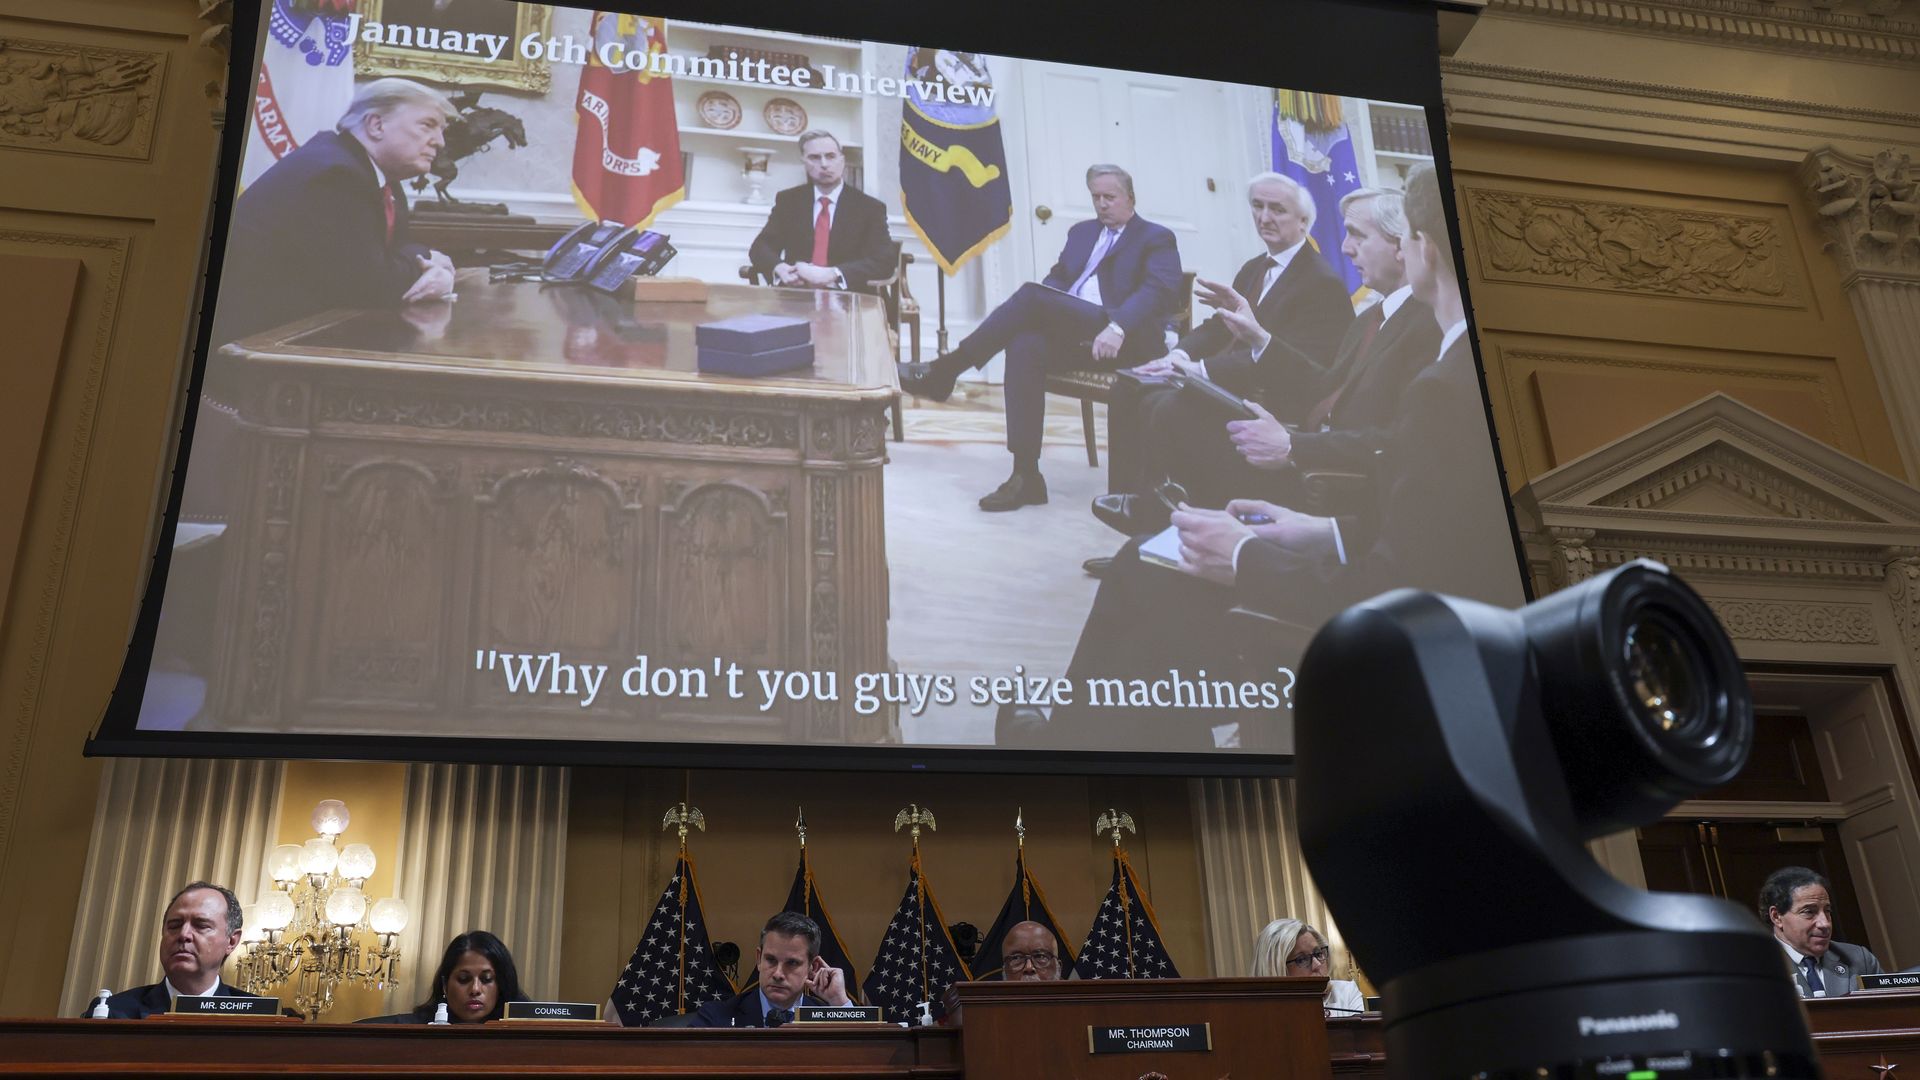 Photo of a video screen showing a picture of Donald Trump and senior DOJ officials with the text "Why don't you guys seize machines?"